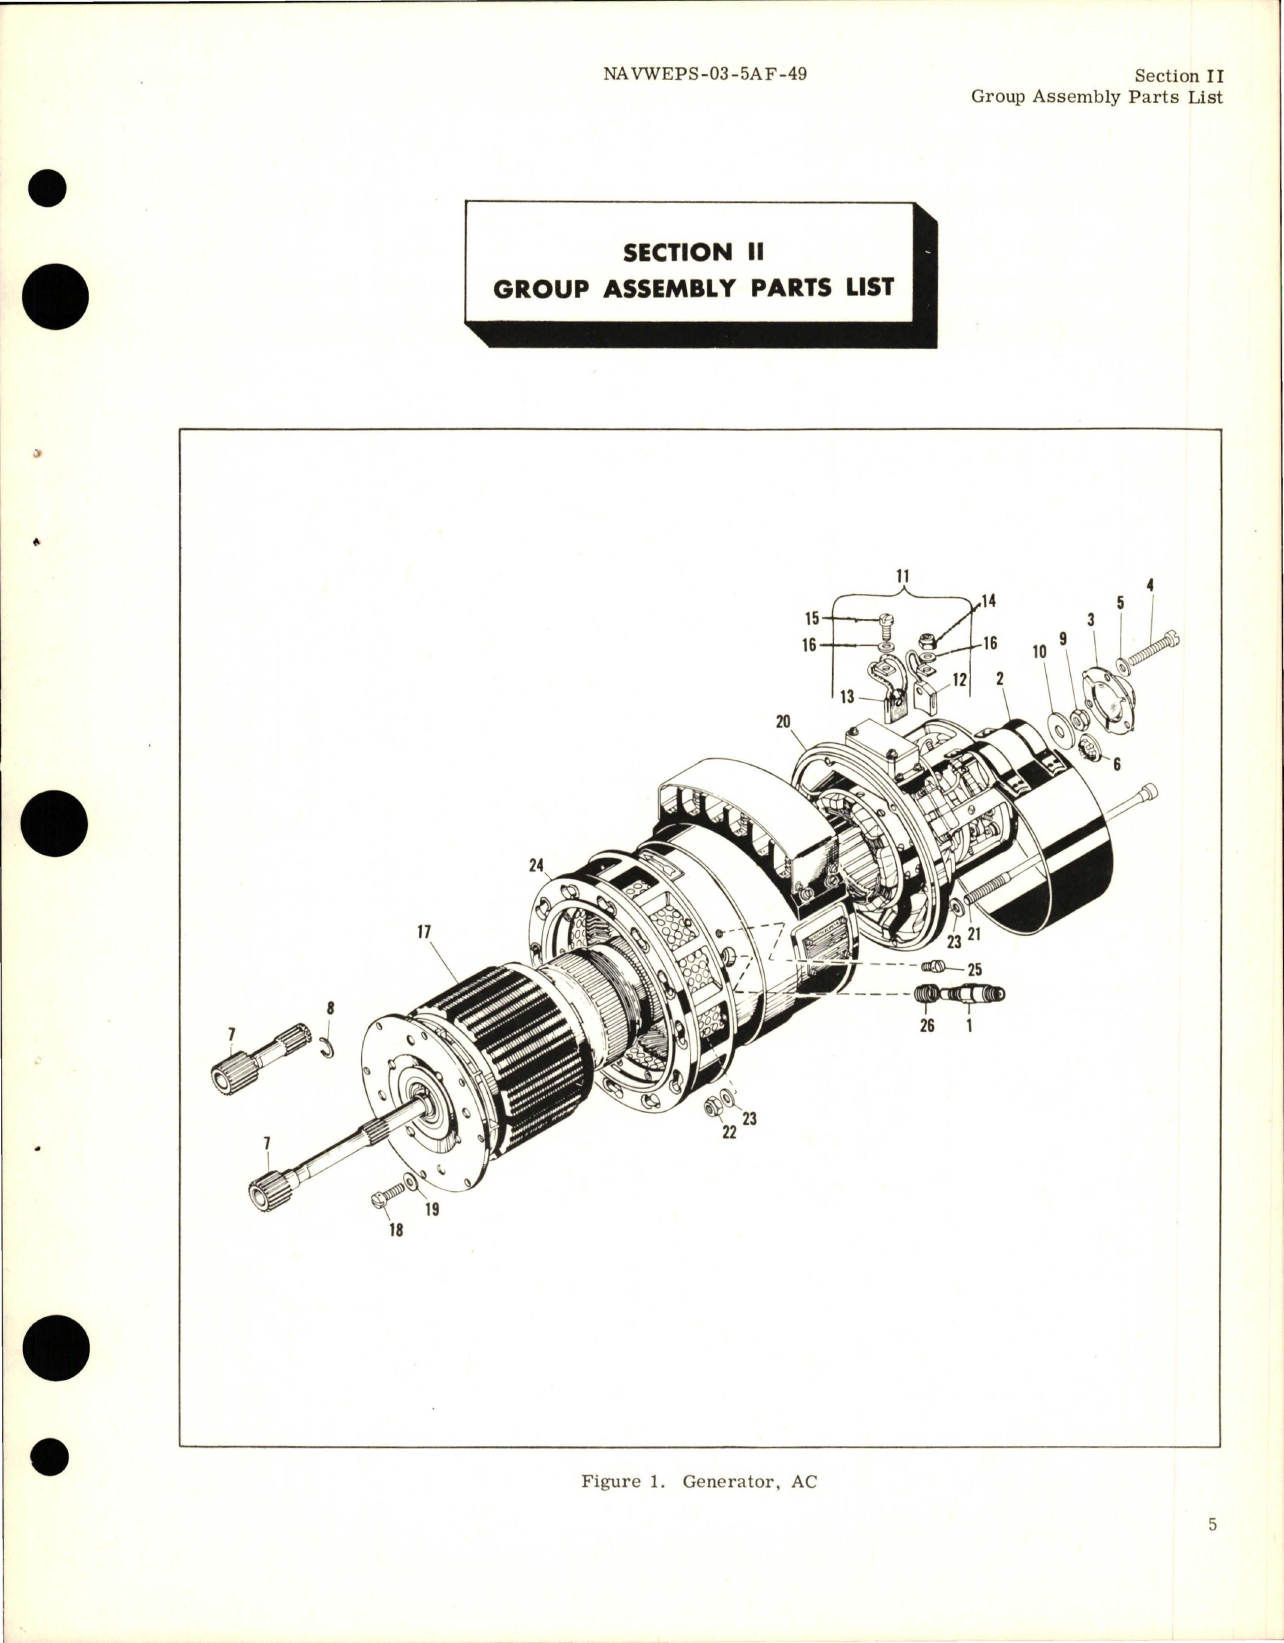 Sample page 9 from AirCorps Library document: Illustrated Parts Breakdown for AC Generator - Parts 903J820-1, A50J207-2 and A50J207-4